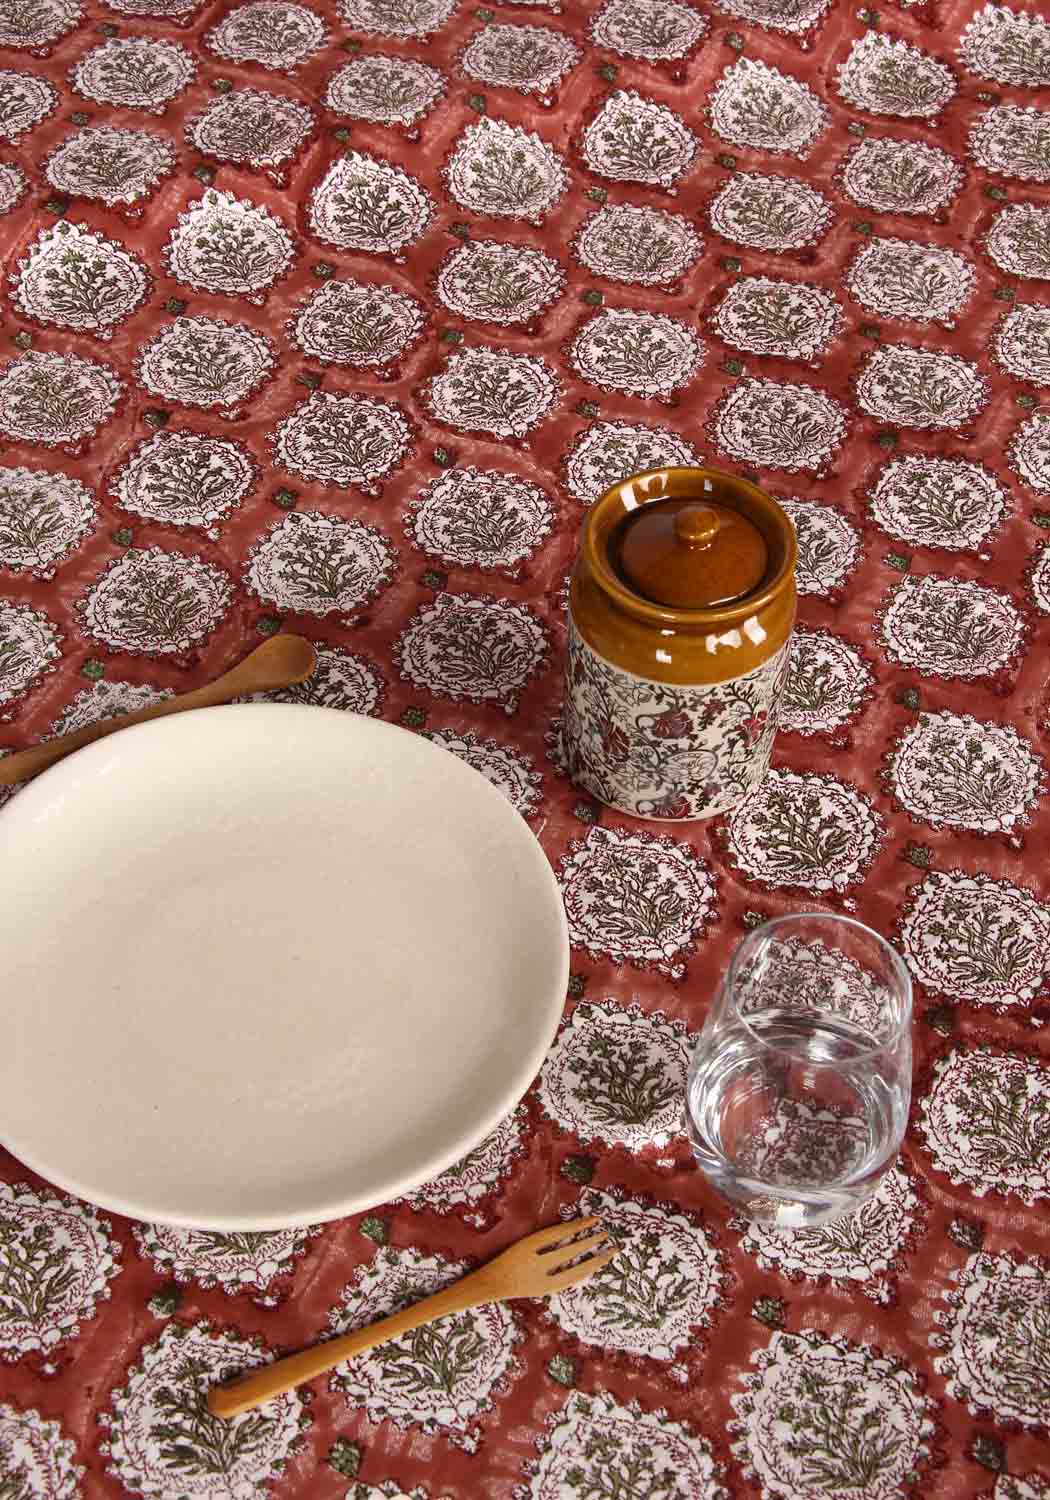 Maple Stone Hand Block Print Cotton Table Cover